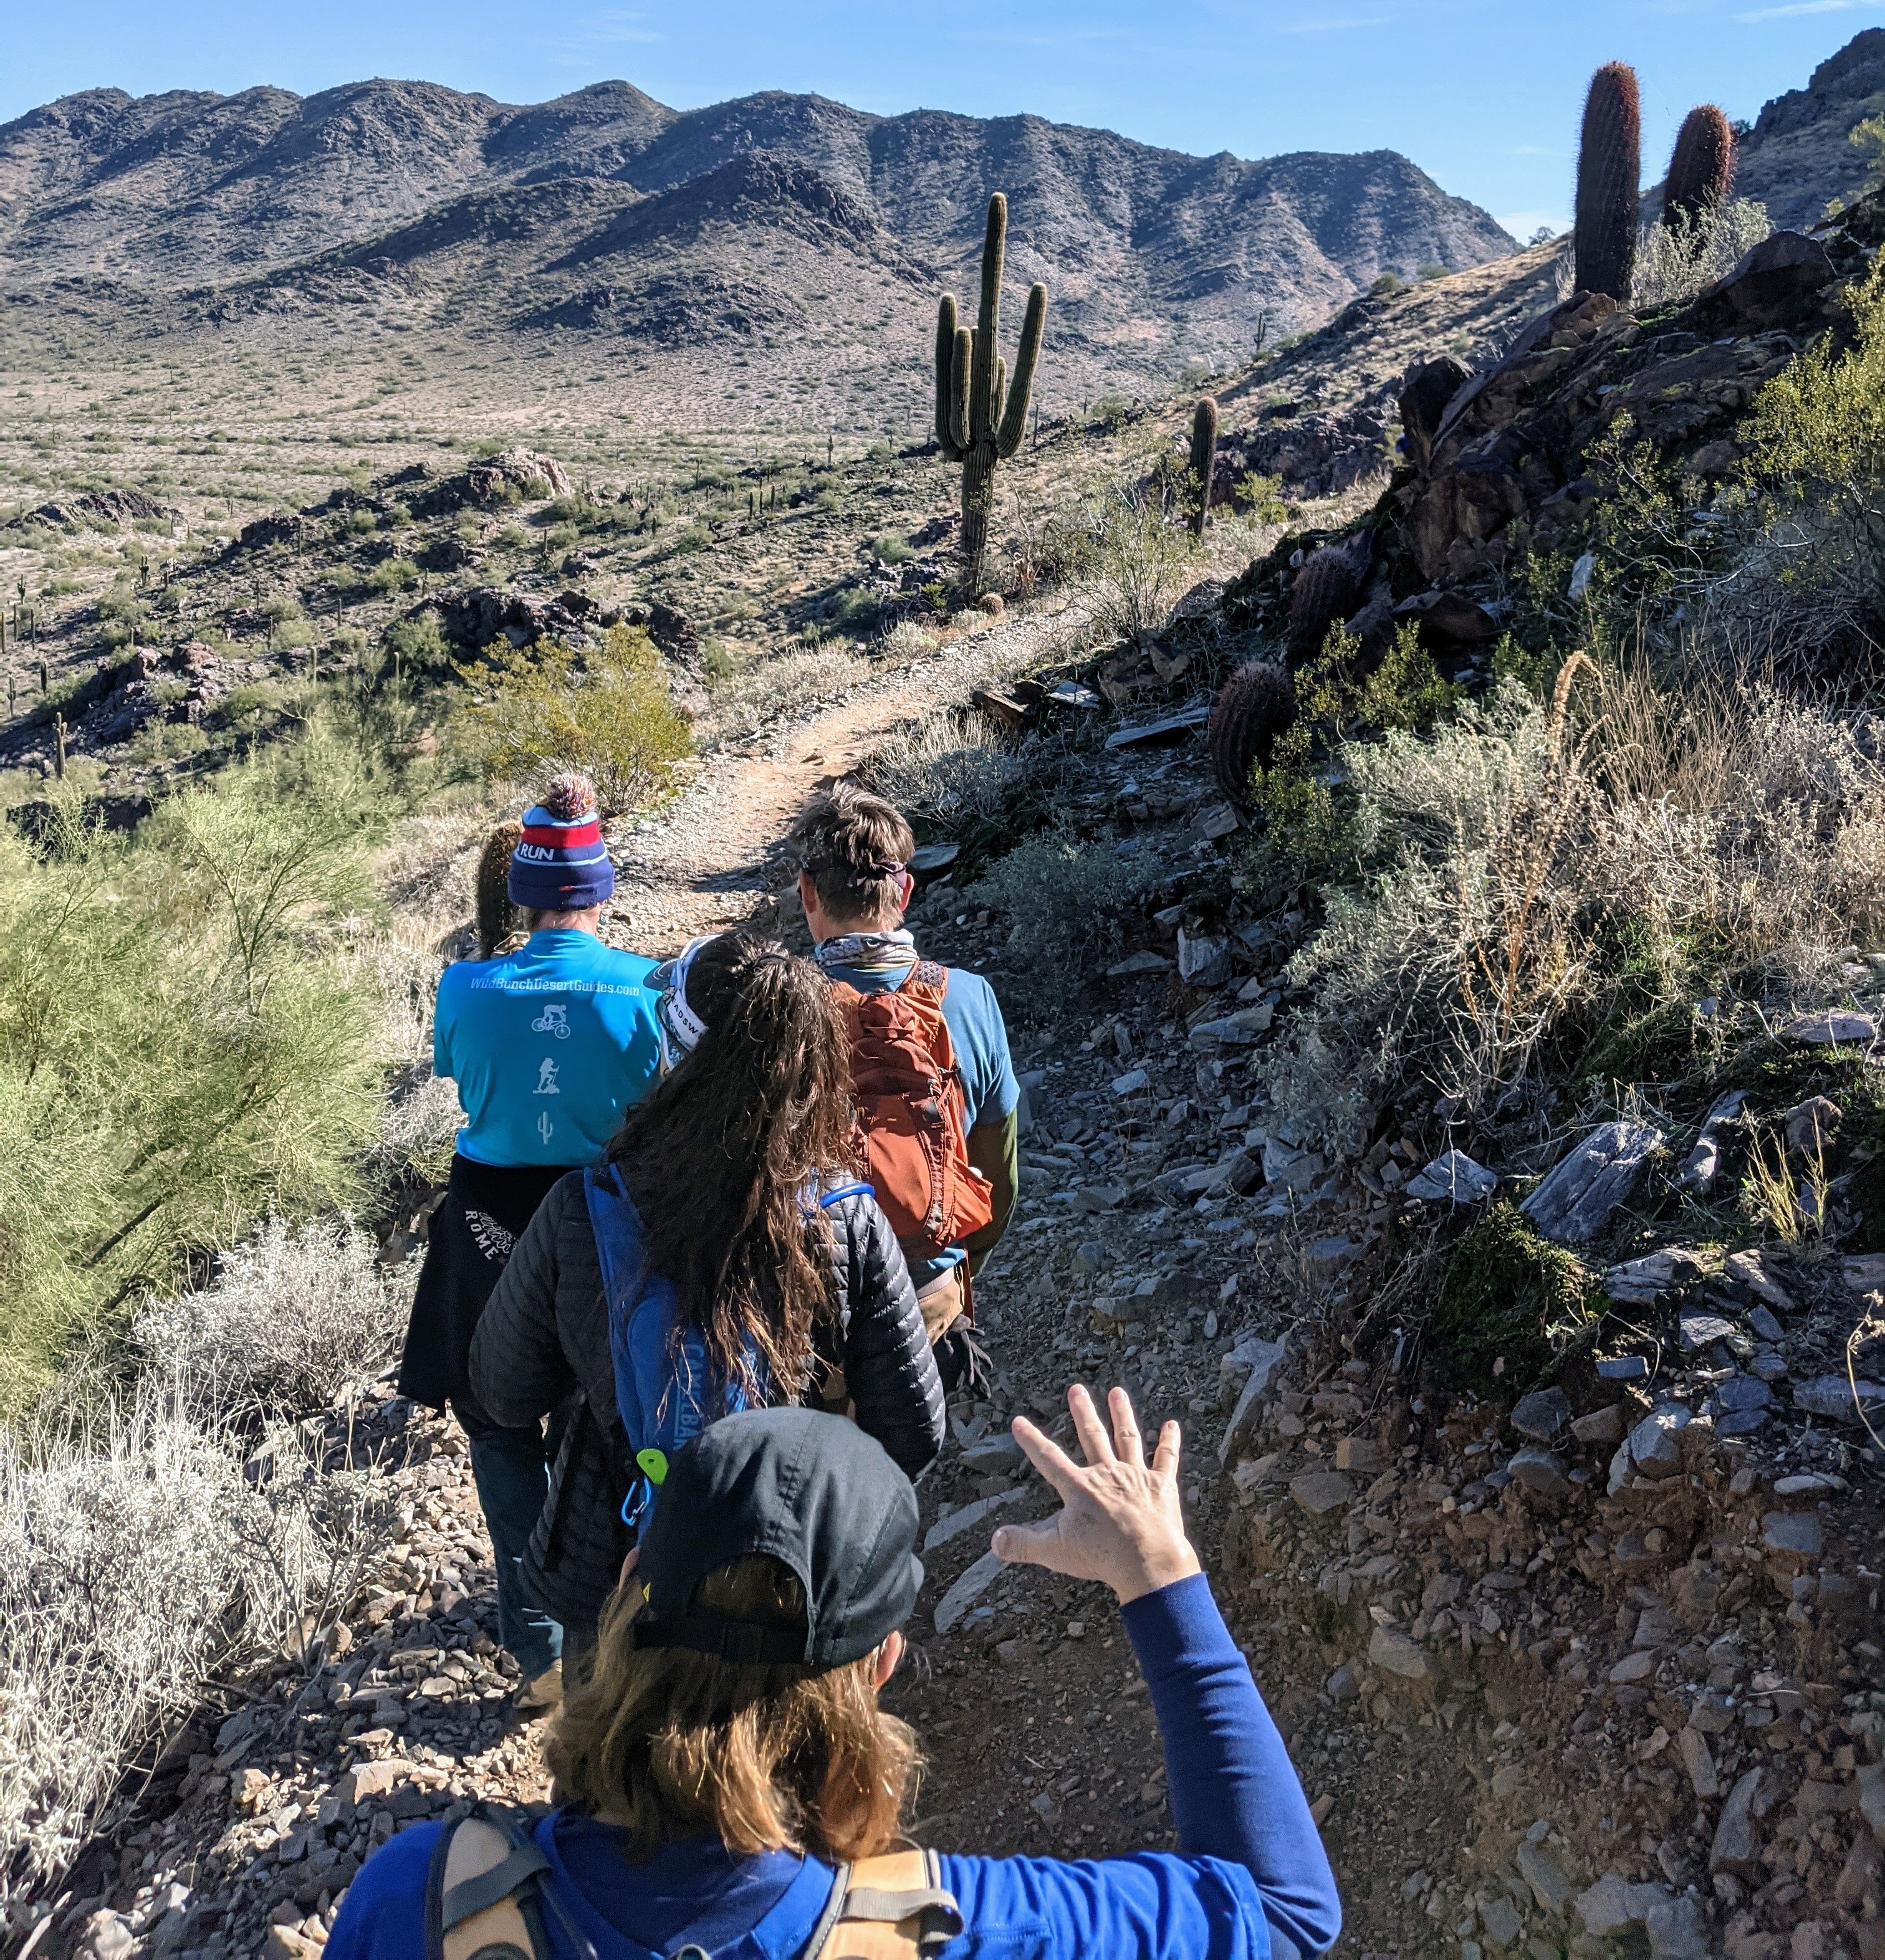 Henry's hiking group winds along a picturesque Sonoran Desert trail during one of Wild Bunch's Phoenix hiking tours. 